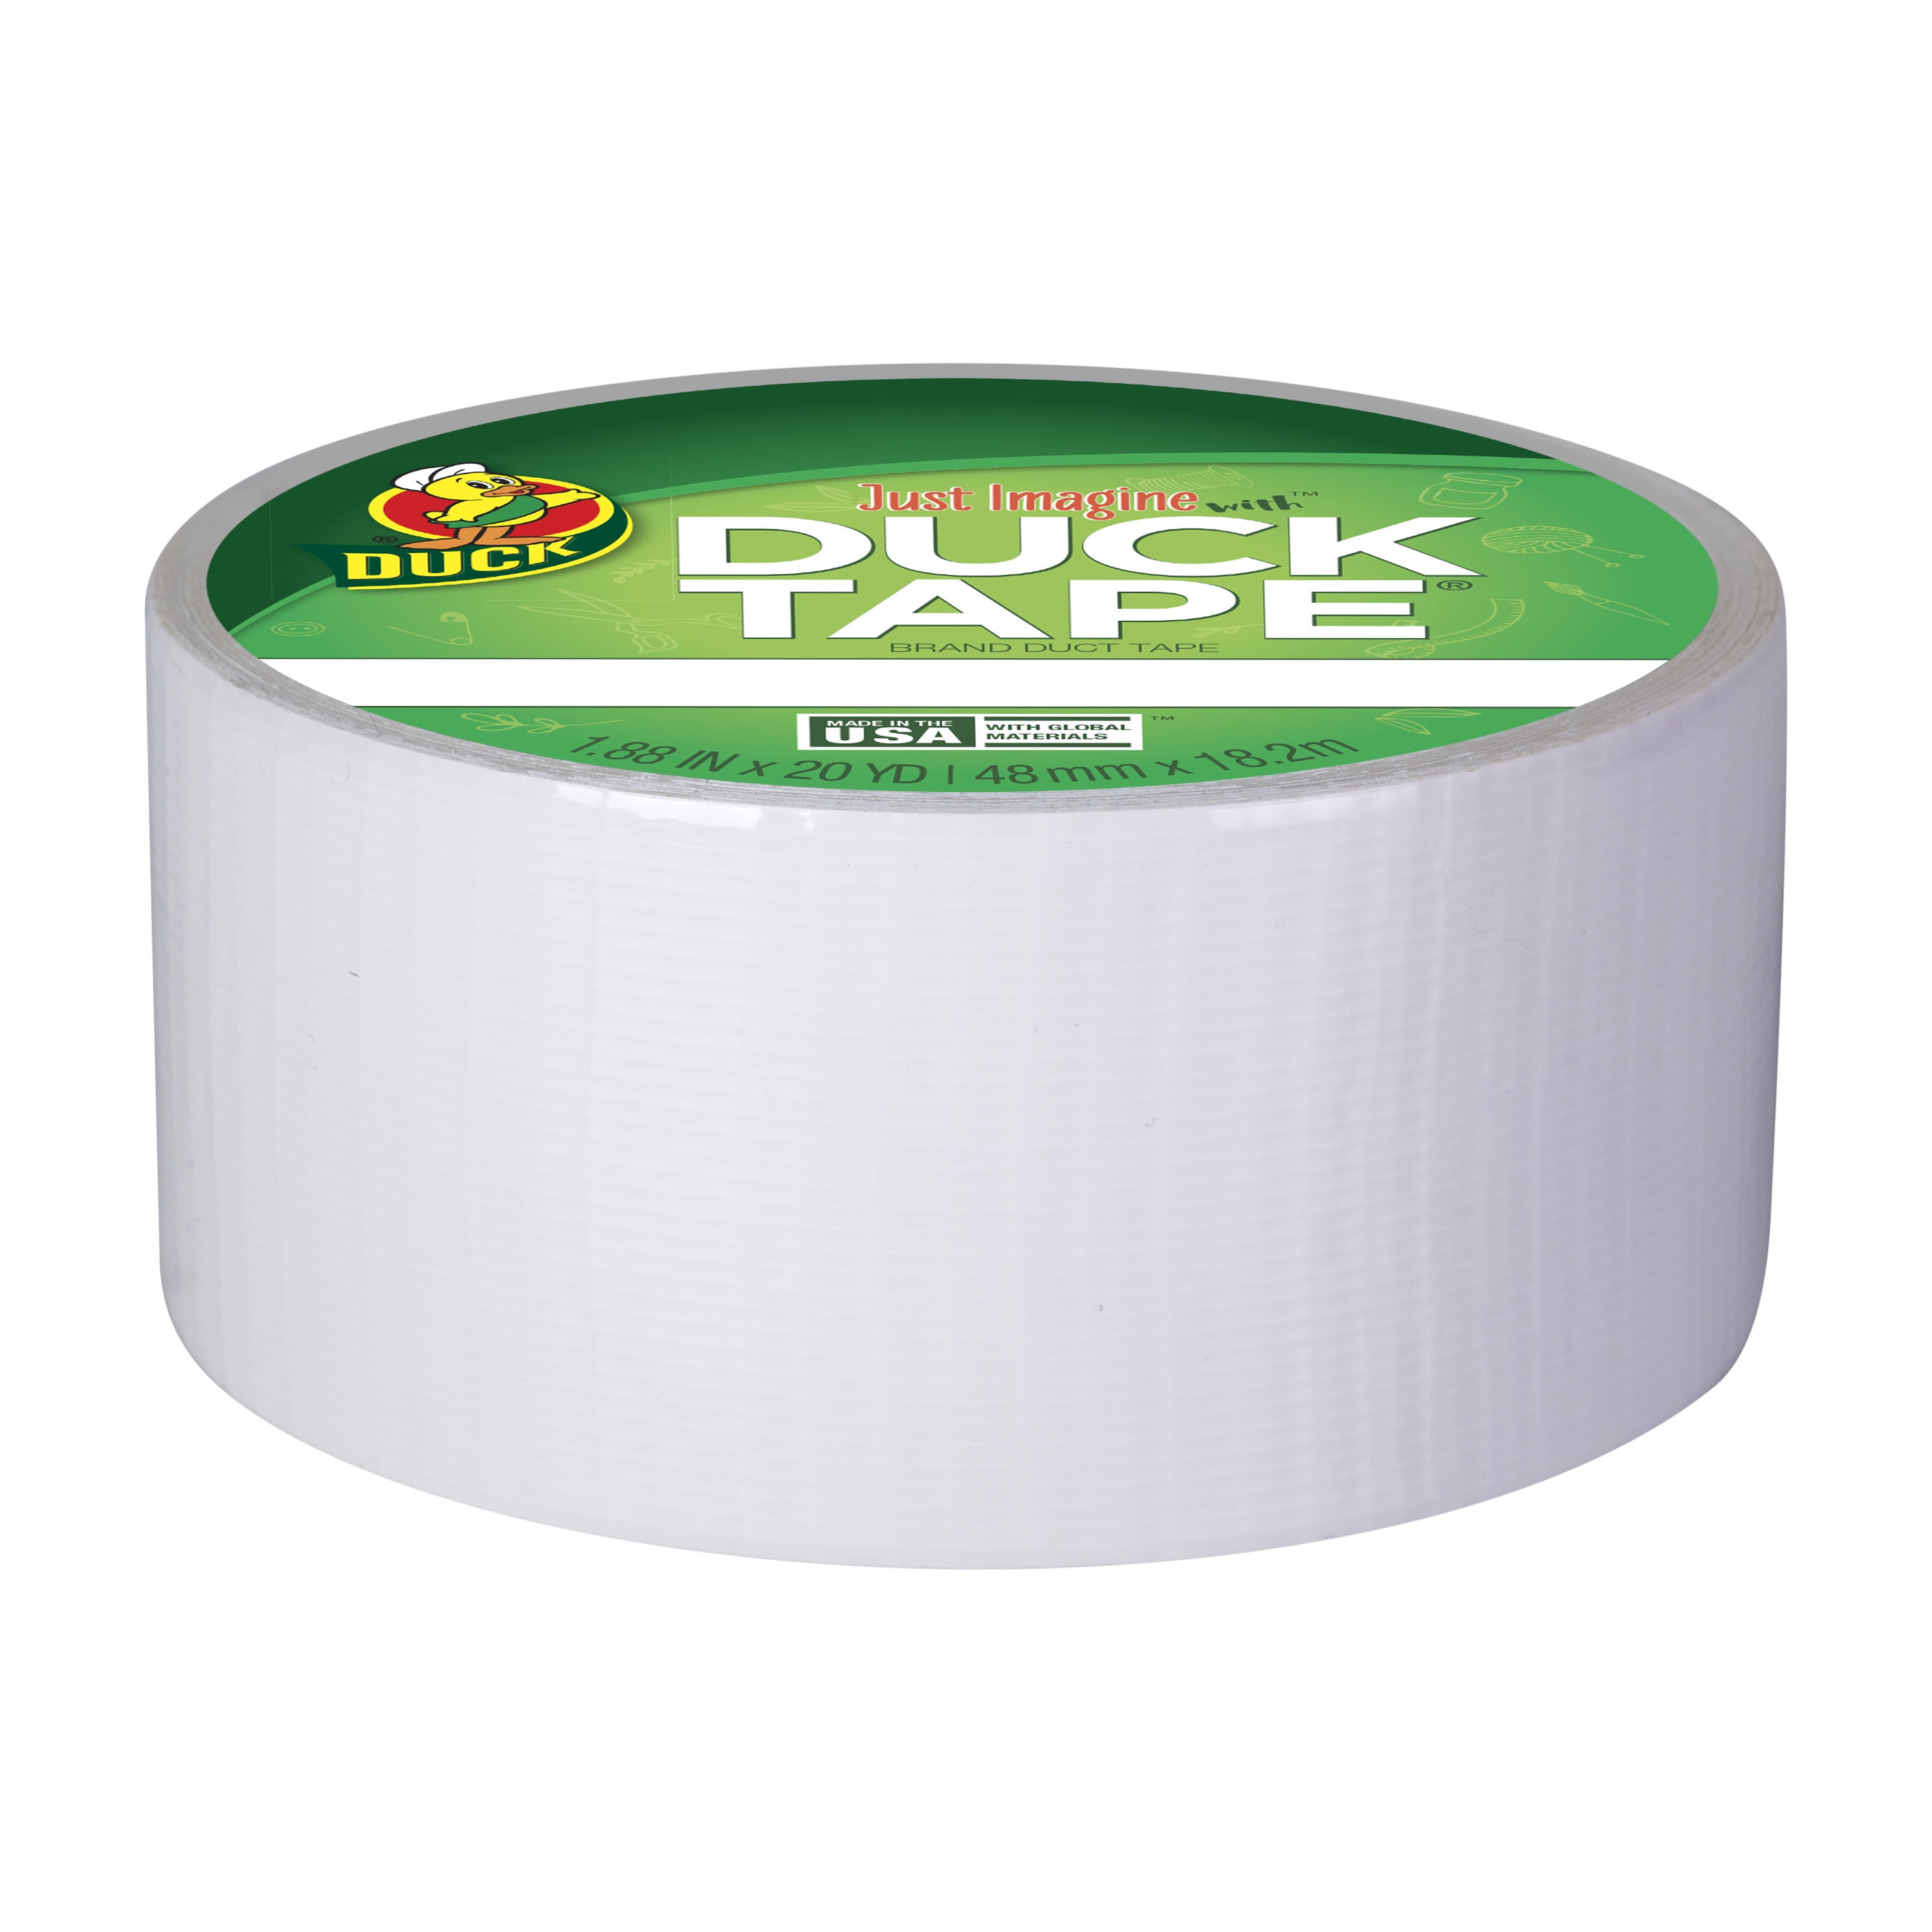 Duck® Brand Color Duct Tape - Aqua, 1.88 Inch x 20 Yard - Fred Meyer